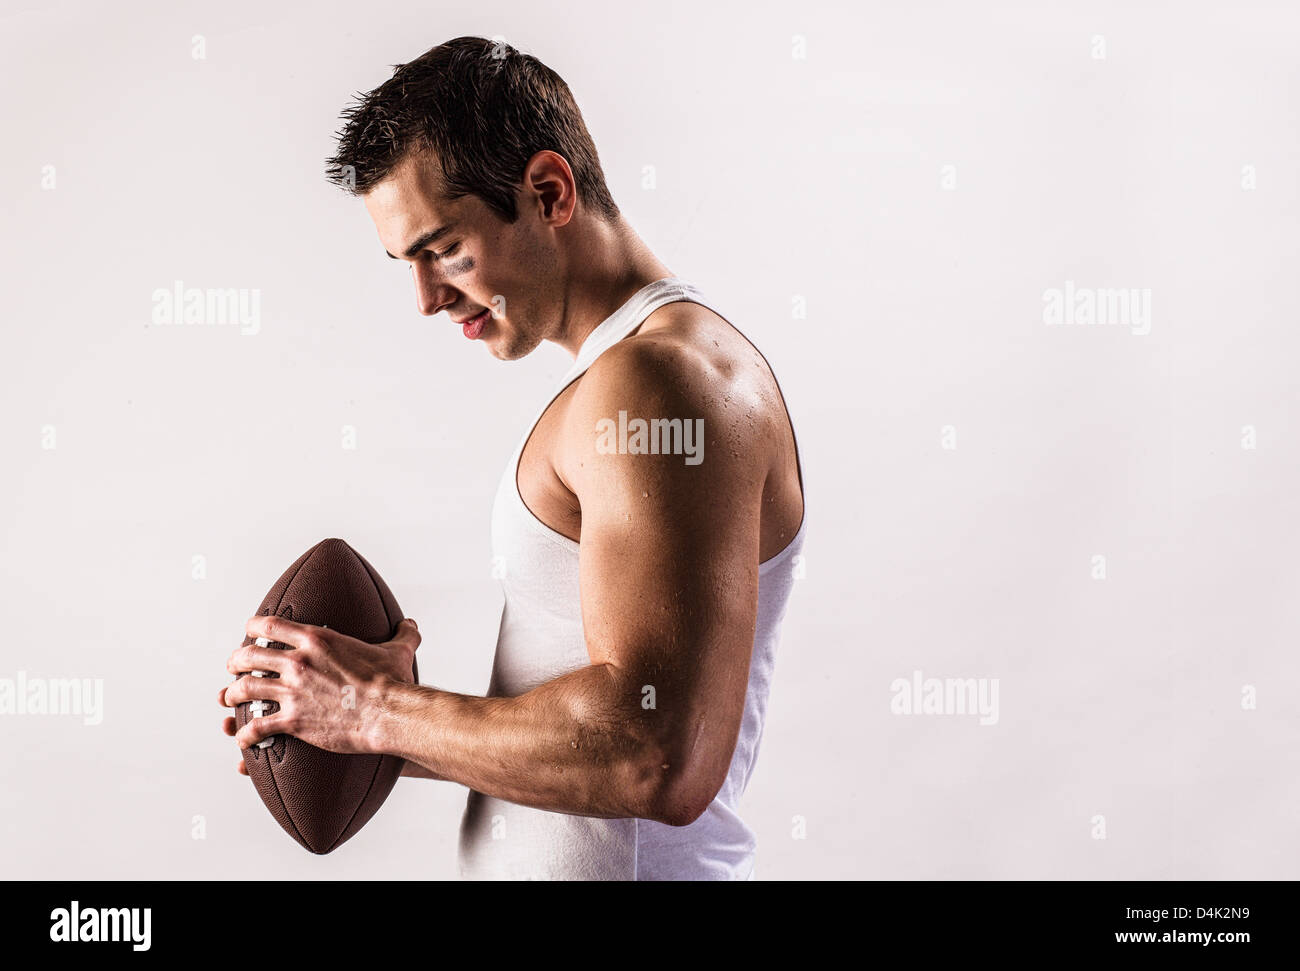 Athletic man holding football Banque D'Images